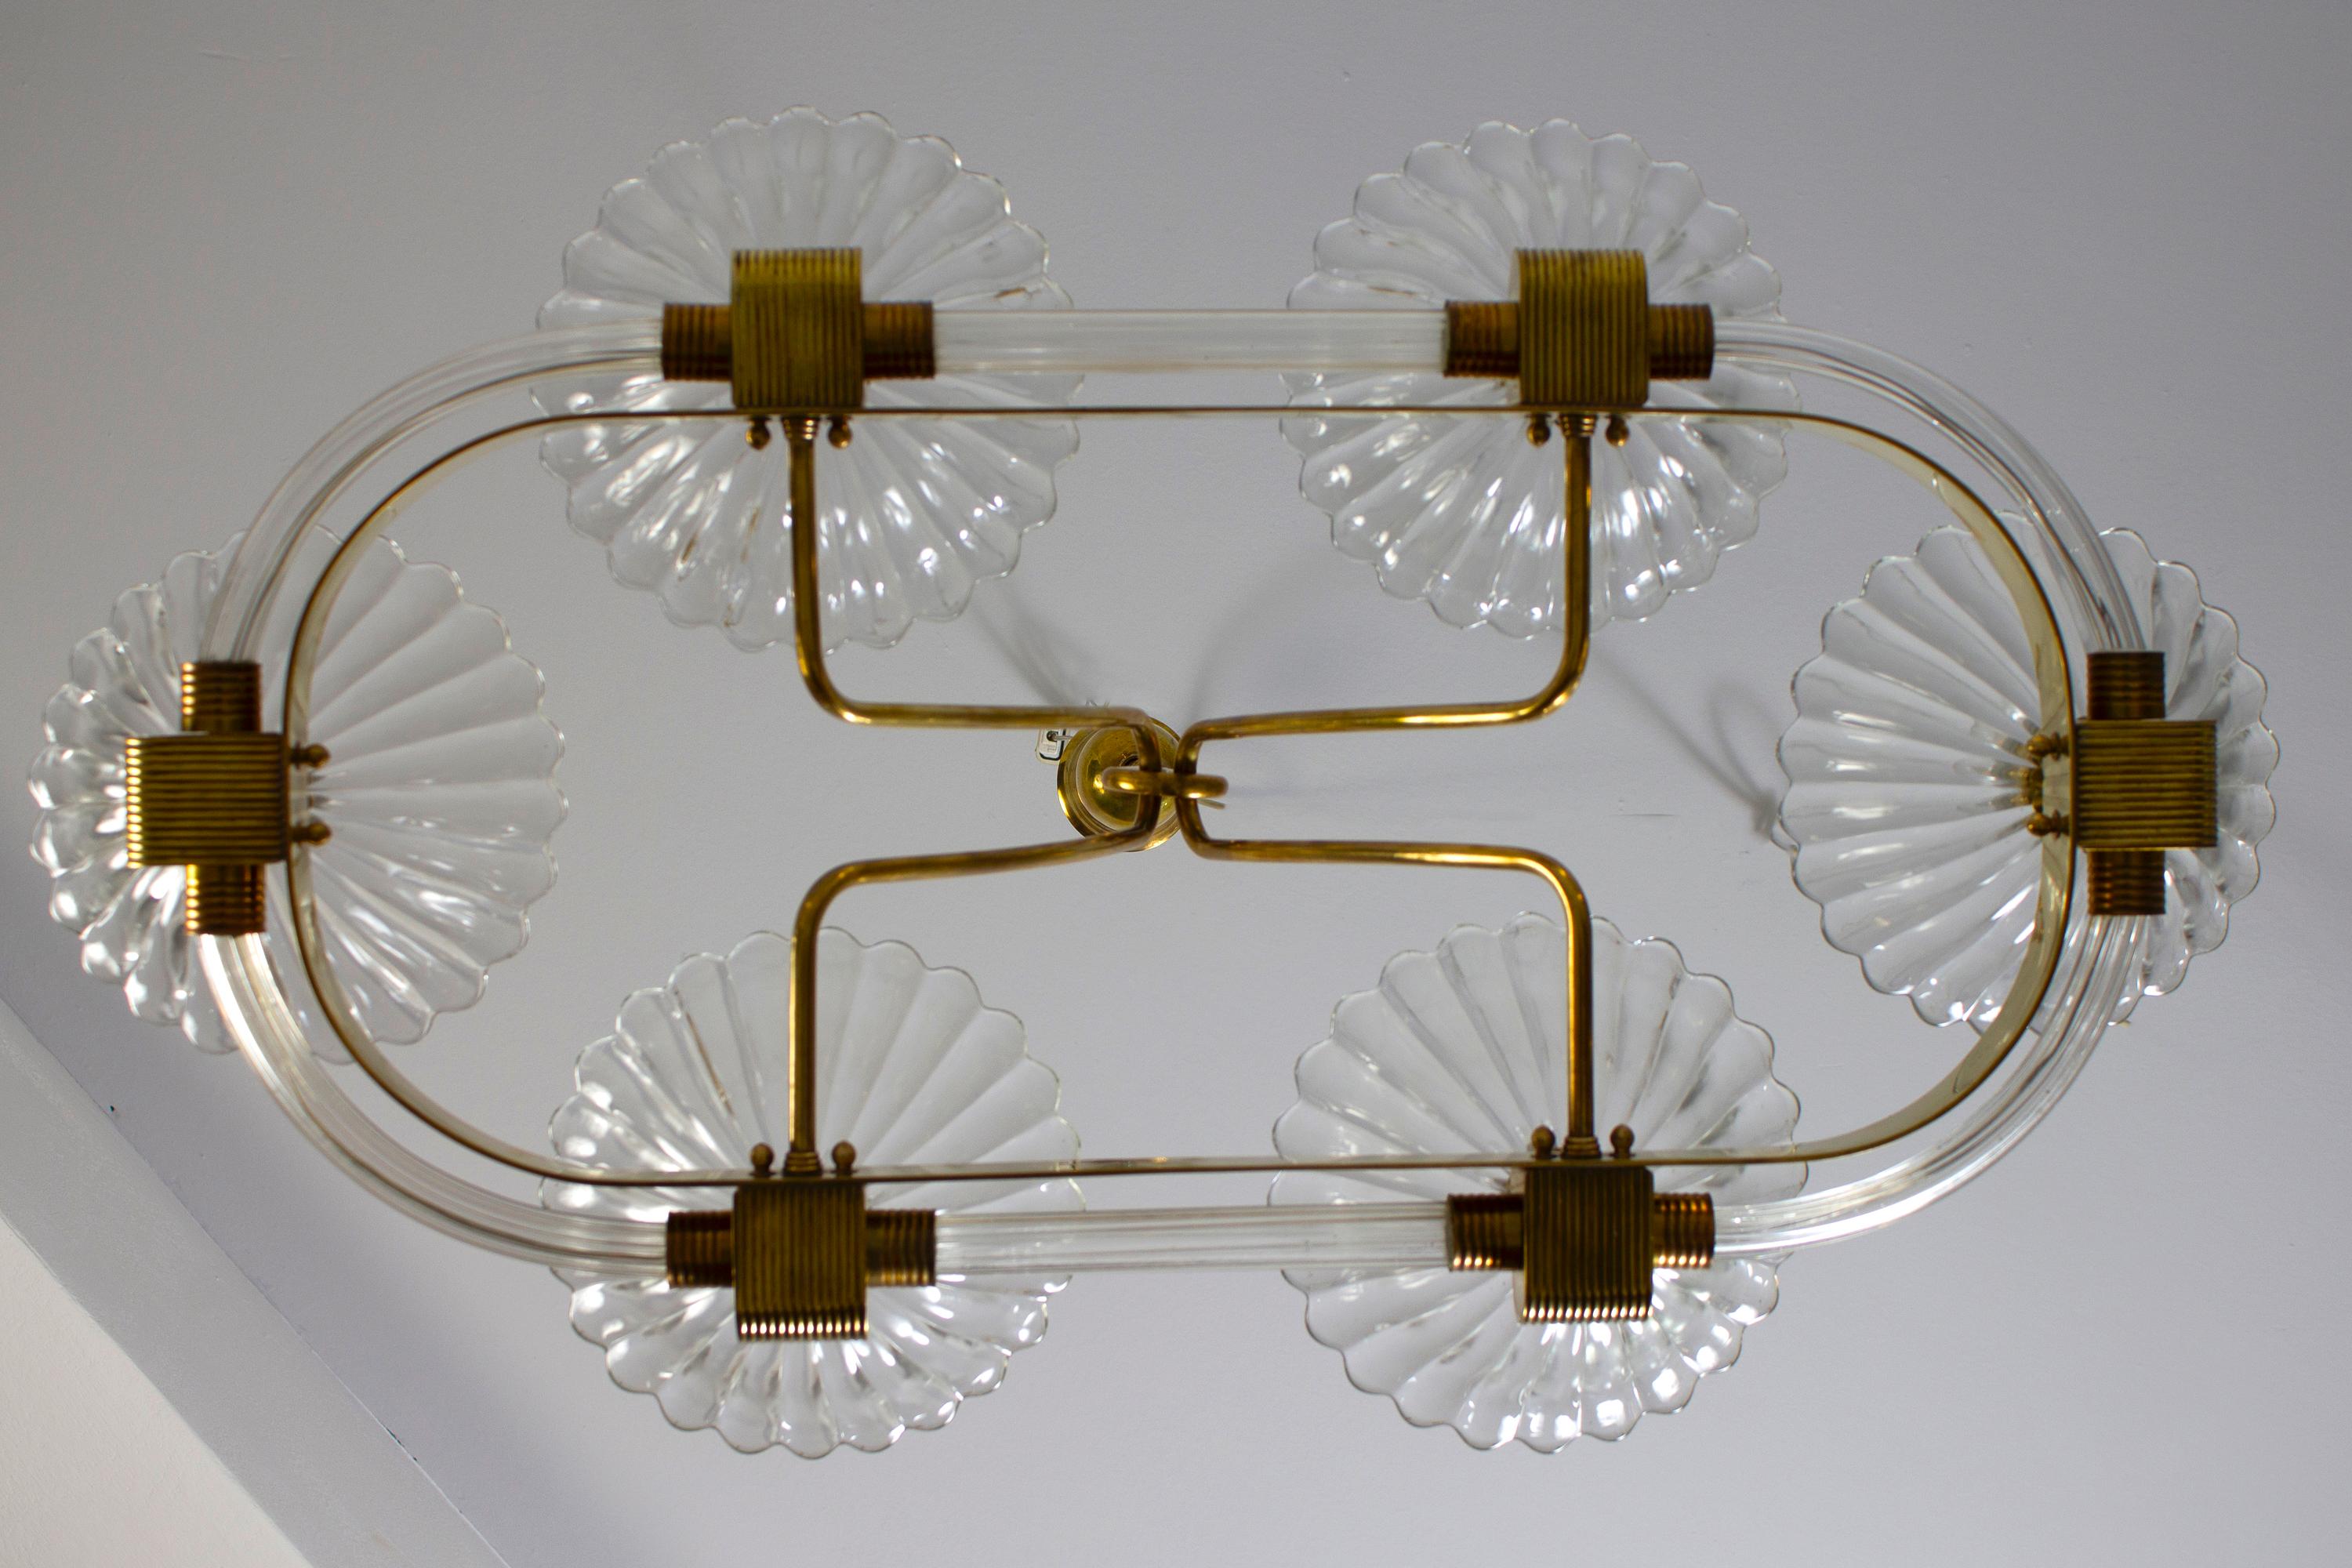  Art Deco Oval Shape Brass and Murano Glass Chandelier by Ercole Barovier 1940 For Sale 7